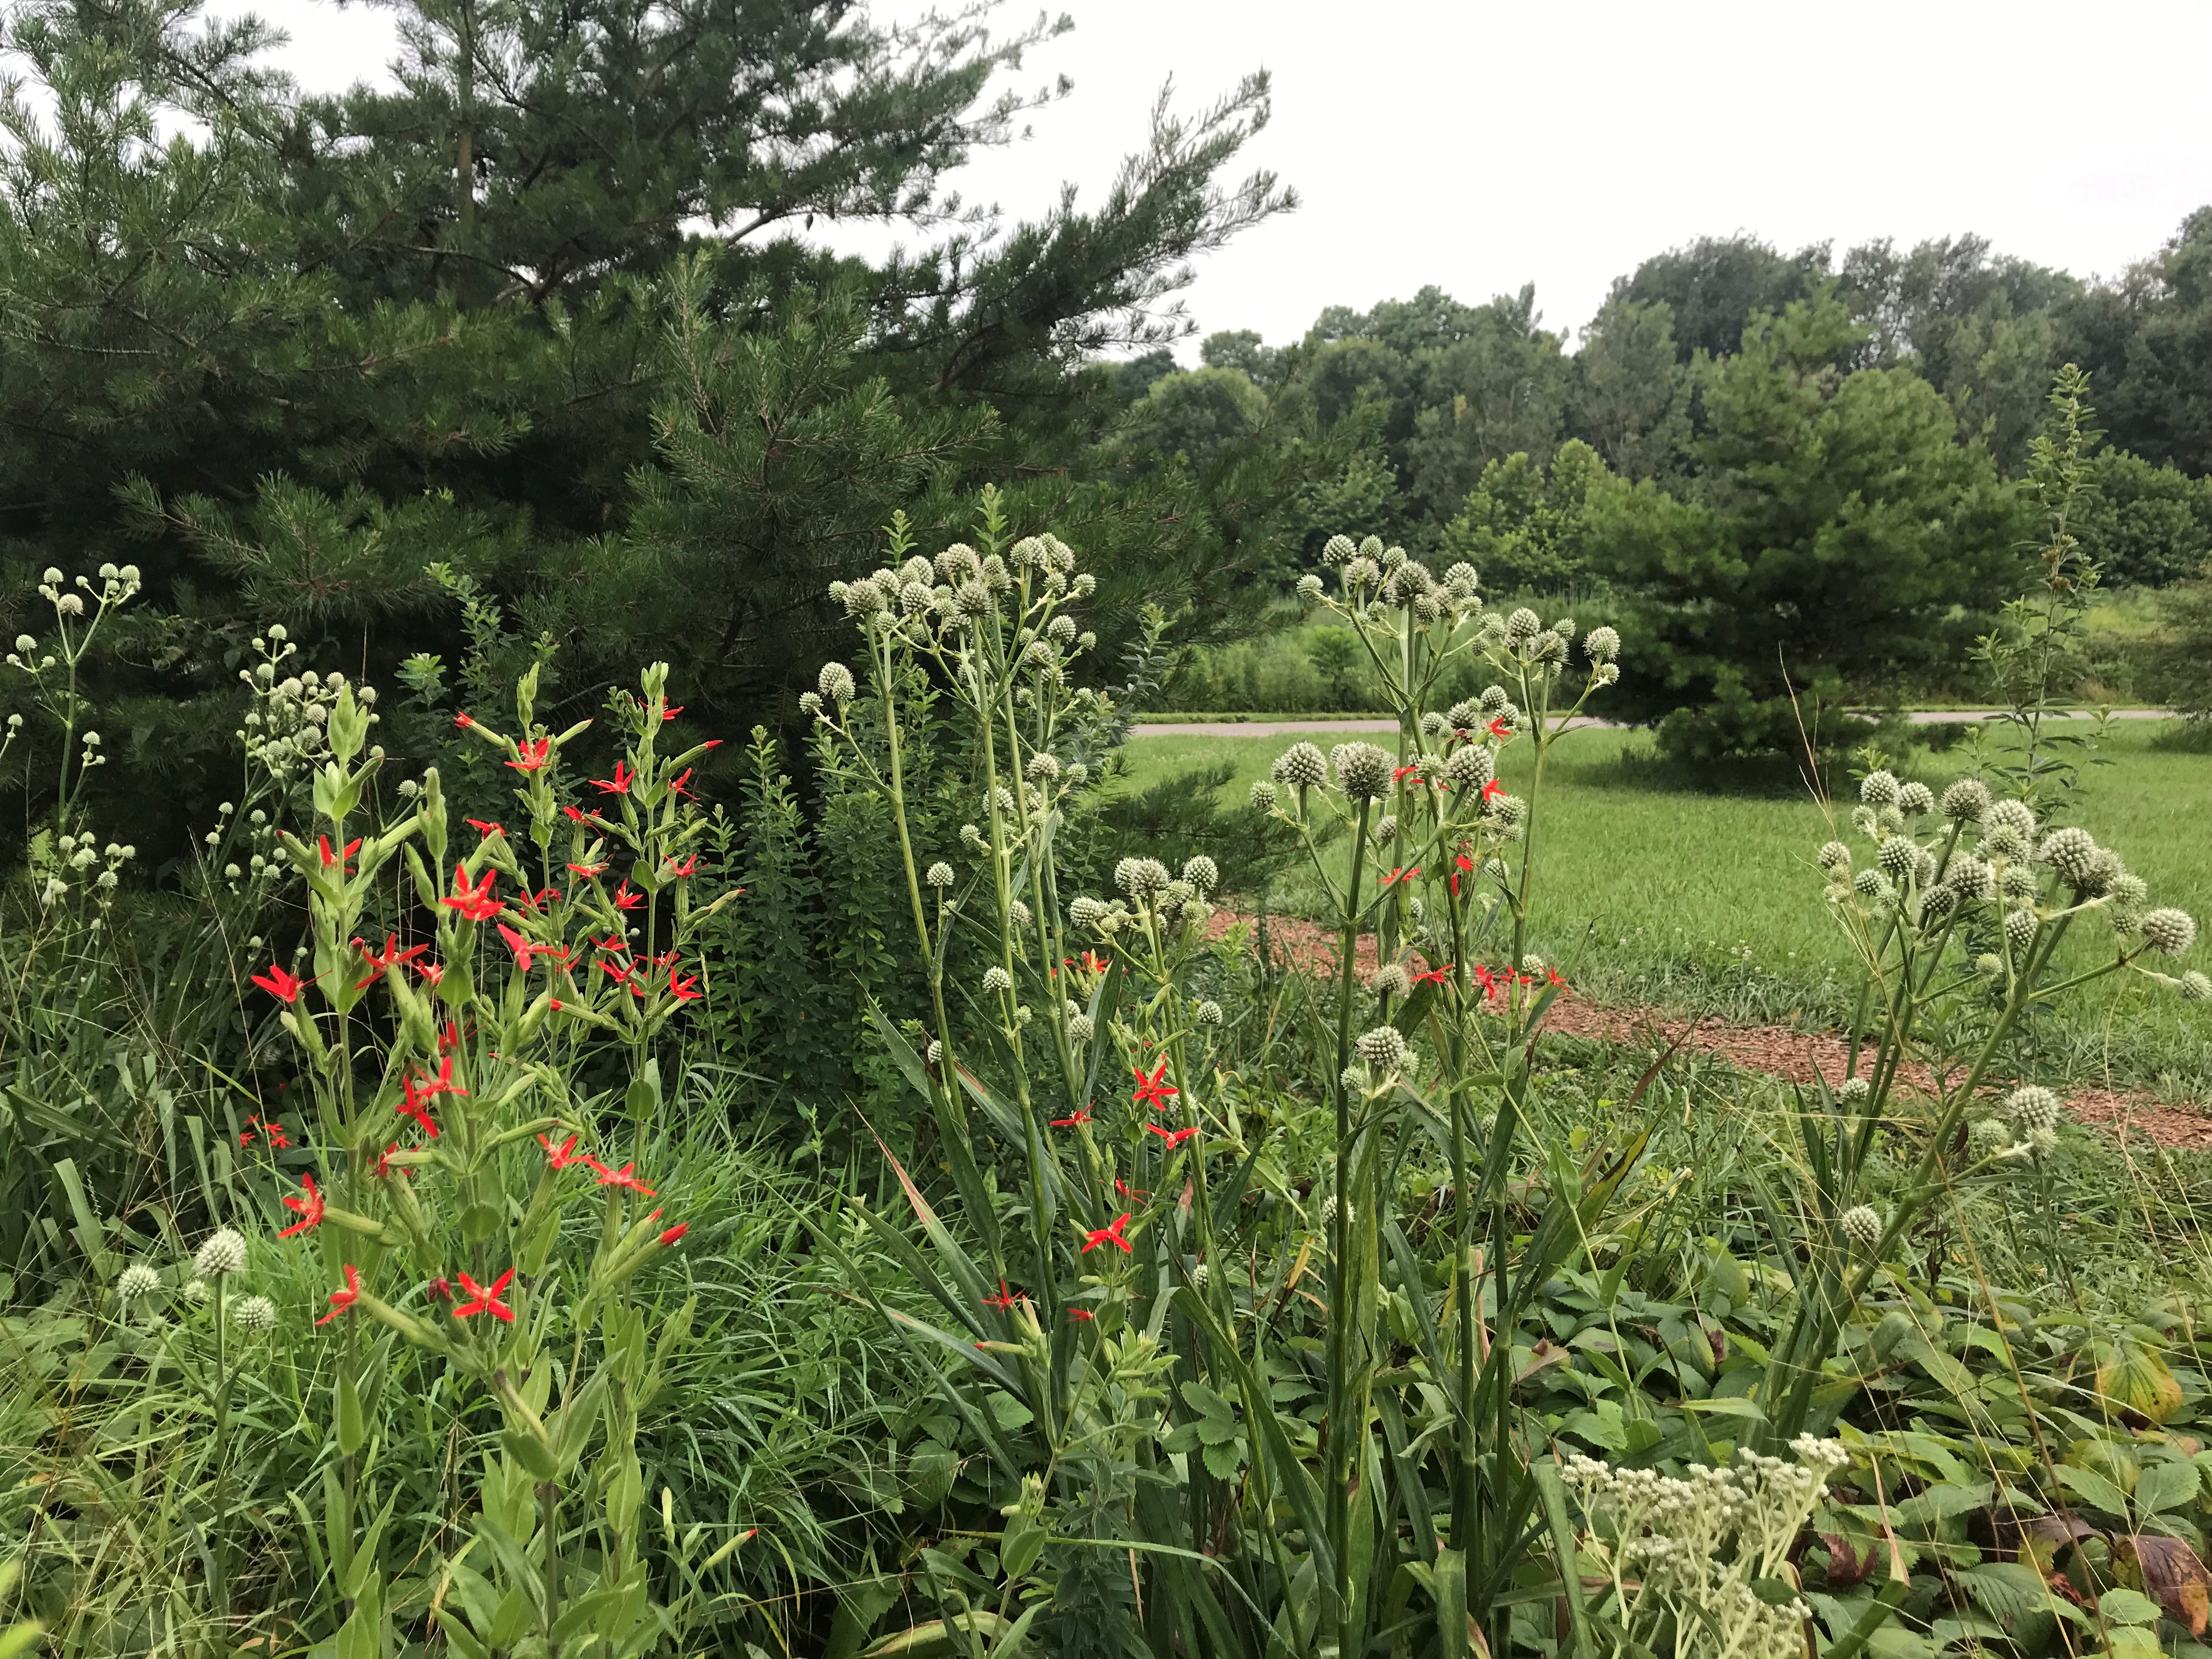 Eryngium yuccifolium, commonly called rattlesnake-master or button snake-root, and the red-blooming silene regia, commonly called royal catchfly, occur in rocky woods and prairies of Kentucky's Pennyrile region.